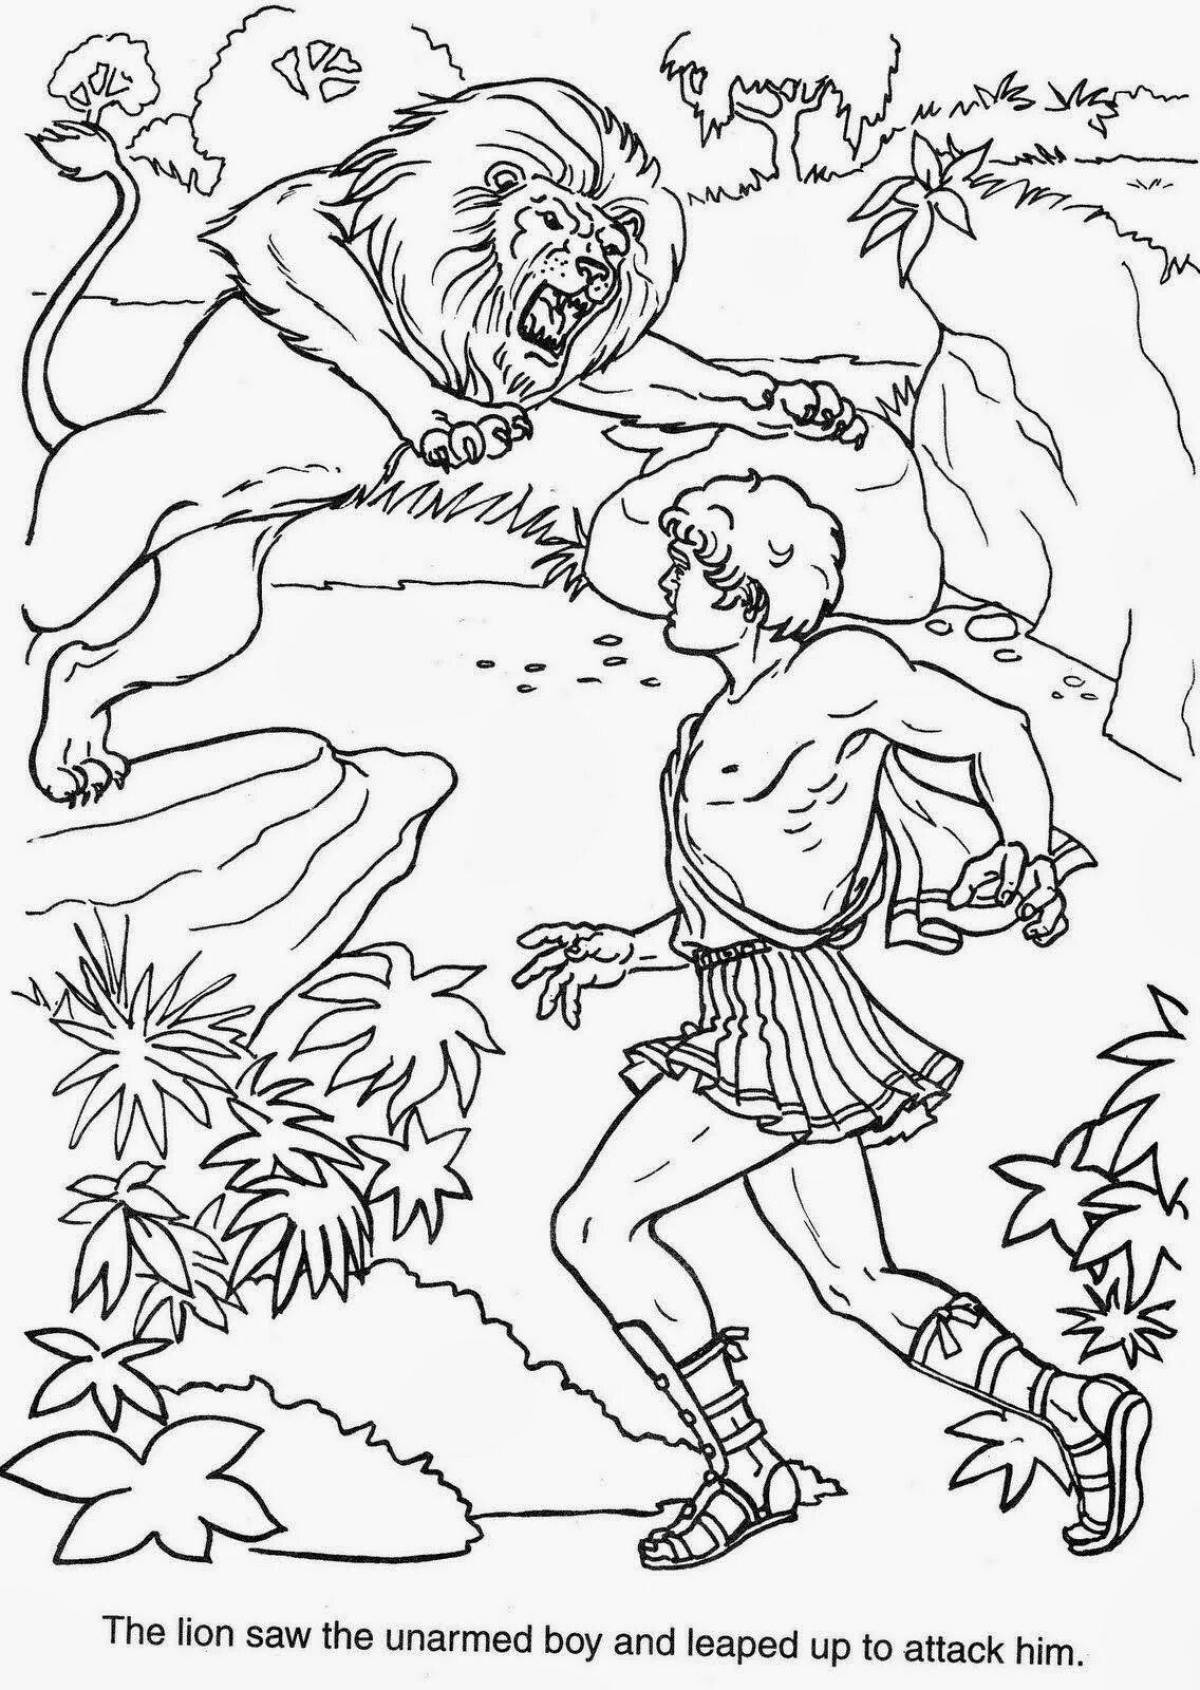 12 labors of hercules coloring page with bright colors